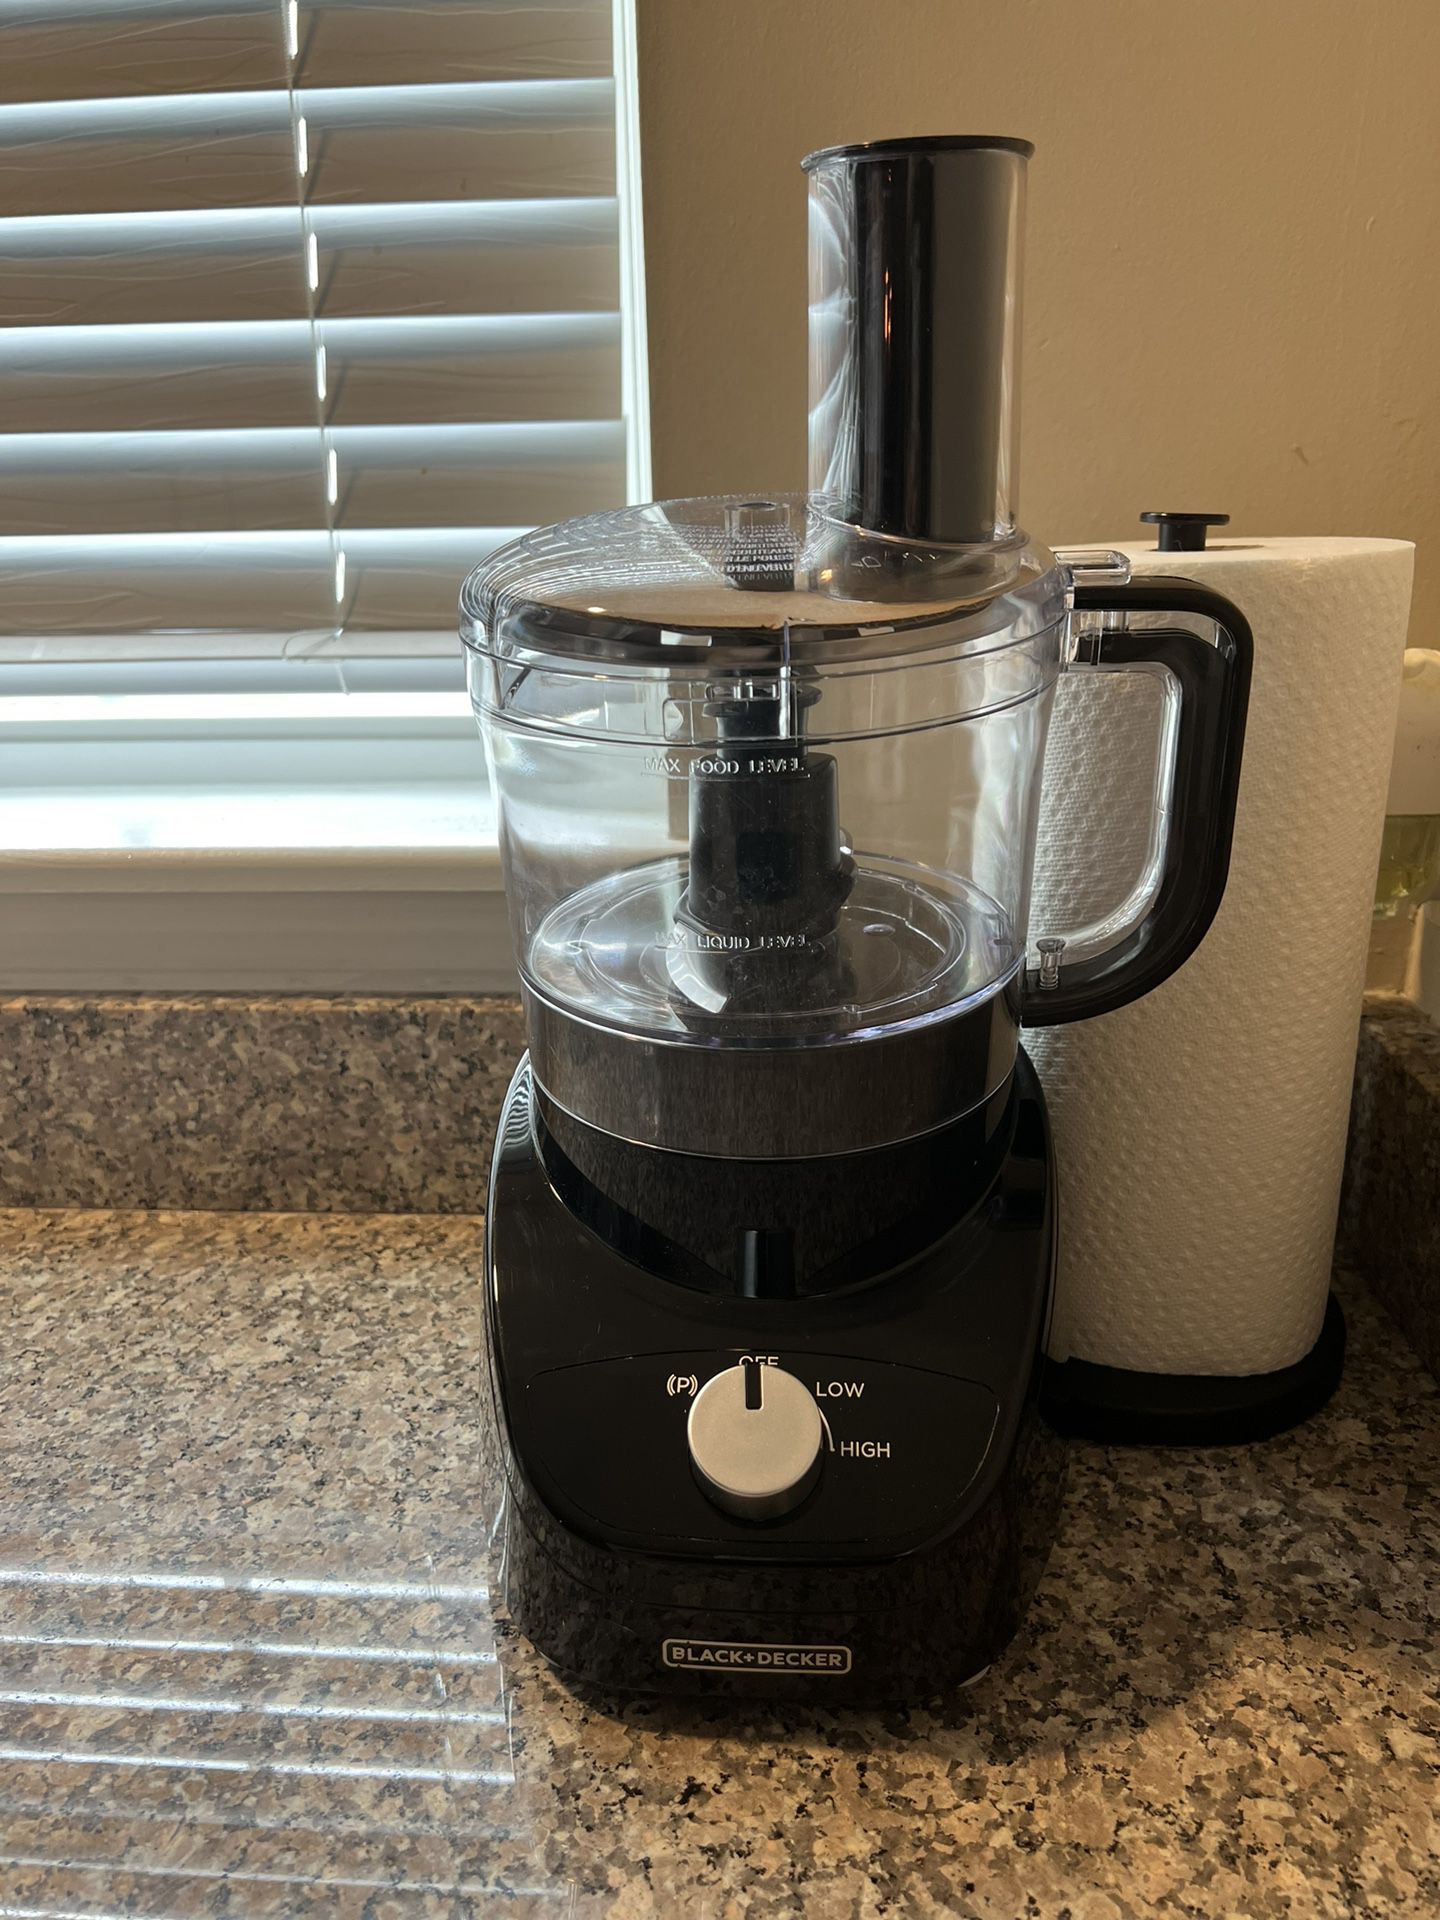 BLACK+DECKER 8-Cup Food Processor for Sale in Avon, OH - OfferUp